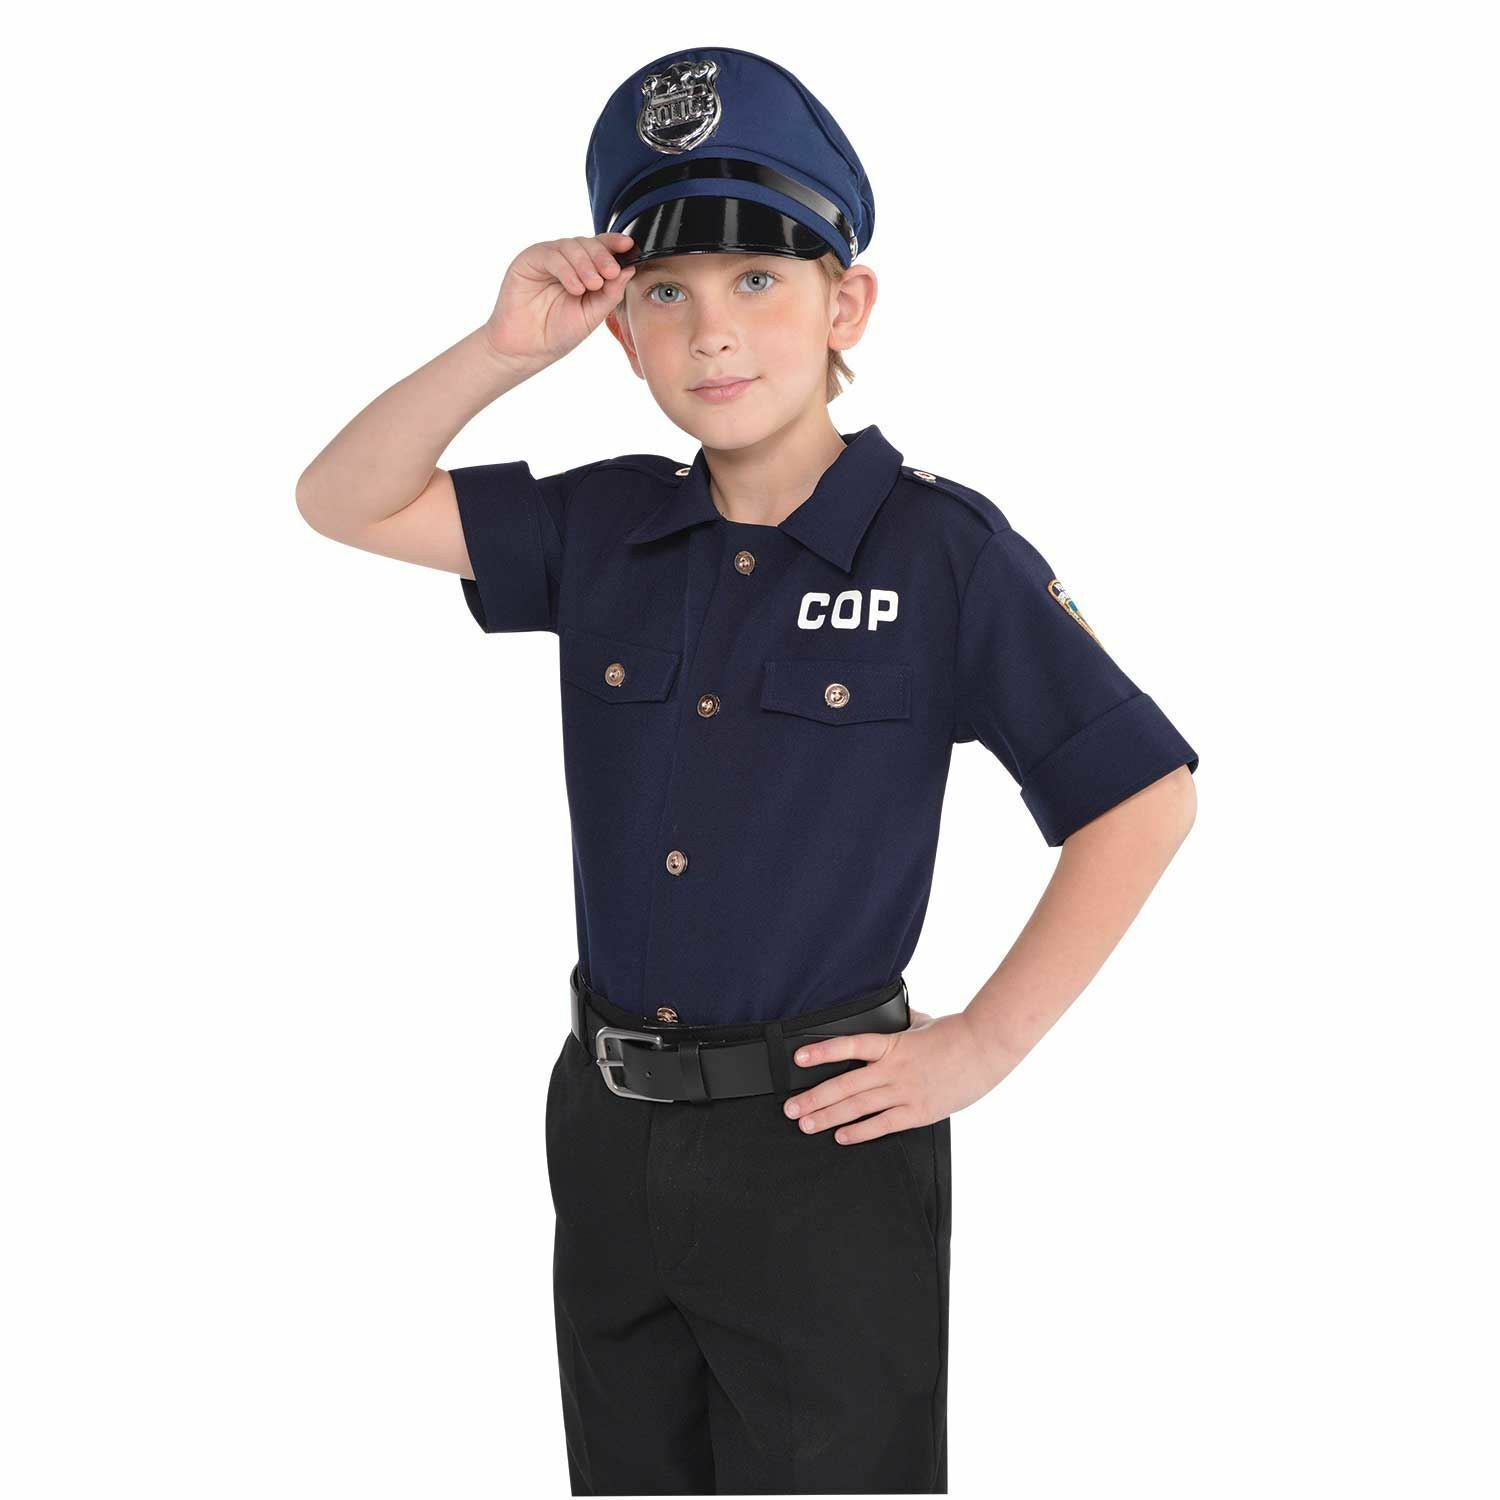 Amscan Children's Fancy Dress Police Shirt UK Size 8/10 Years RRP 8.99 CLEARANCE XL 1.99